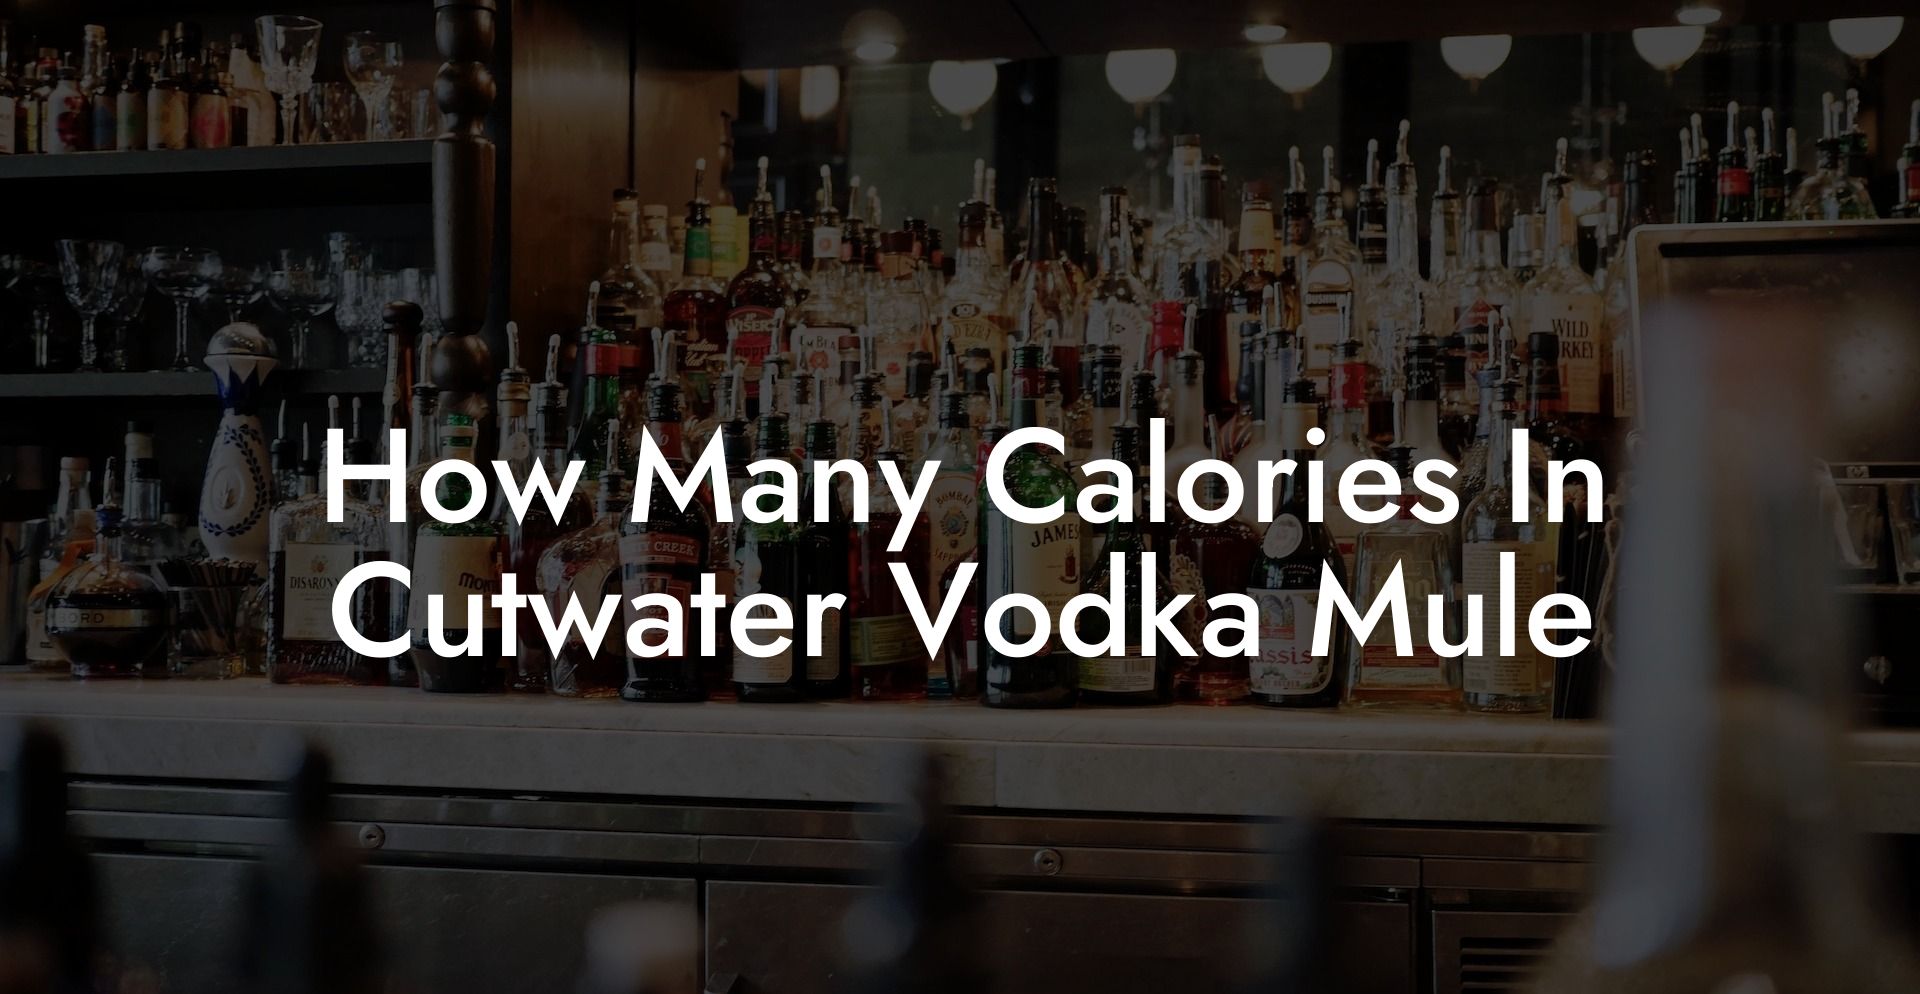 How Many Calories In Cutwater Vodka Mule